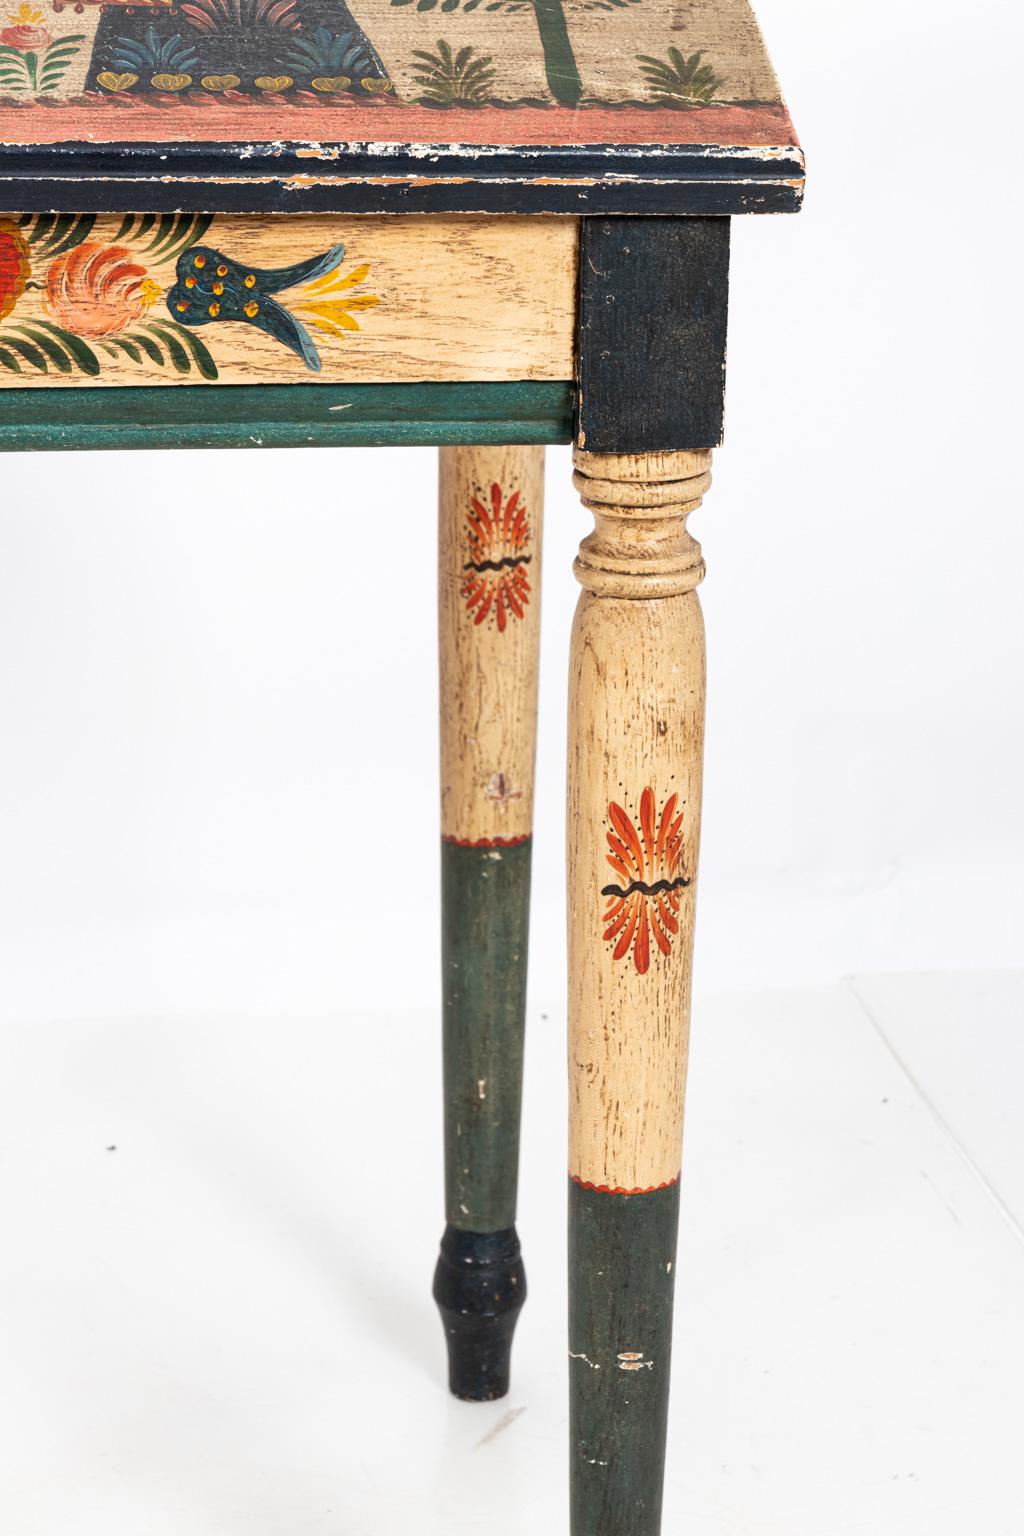 Painted Folk Art writing table detailed with flowers and figures throughout. Please note of wear consistent with age including paint loss and finish loss.